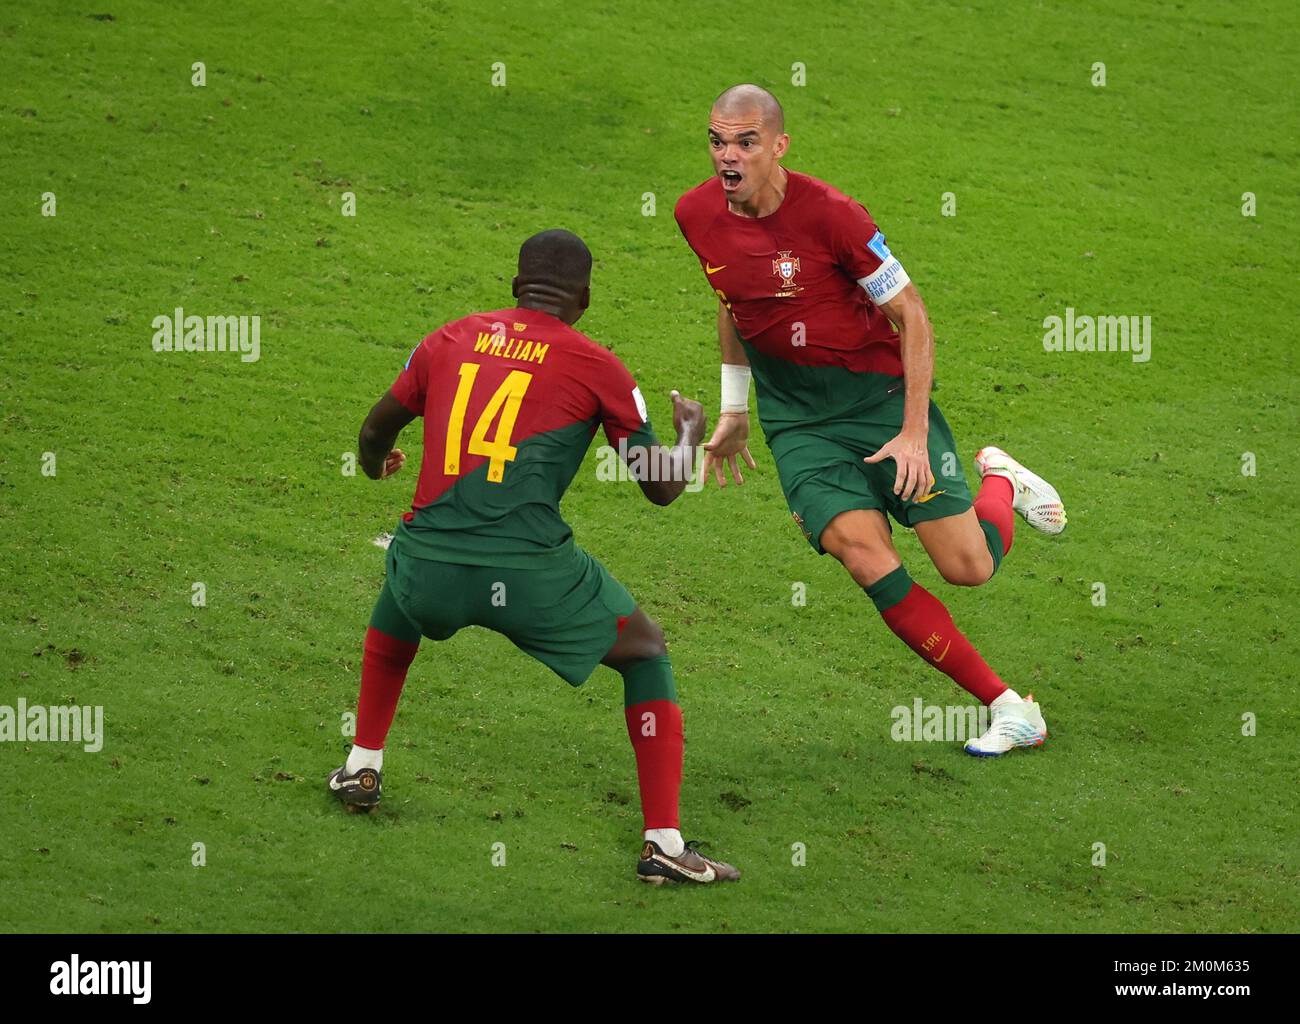 LUSAIL CITY, QATAR - DECEMBER 06:  FIFA World Cup Qatar 2022 Round of 16 match between Portugal and Switzerland at Lusail Stadium on December 06, 2022 in Lusail City, Qatar. Portugal Schweiz 6:1 Pepe of Portugal jubelt Ÿber sein Tor zum 2:0 William Carvalho of Portugal  Fussball WM  2022 in Qatar Katar FIFA Football World Cup 2022 © diebilderwelt / Alamy Stock Stock Photo